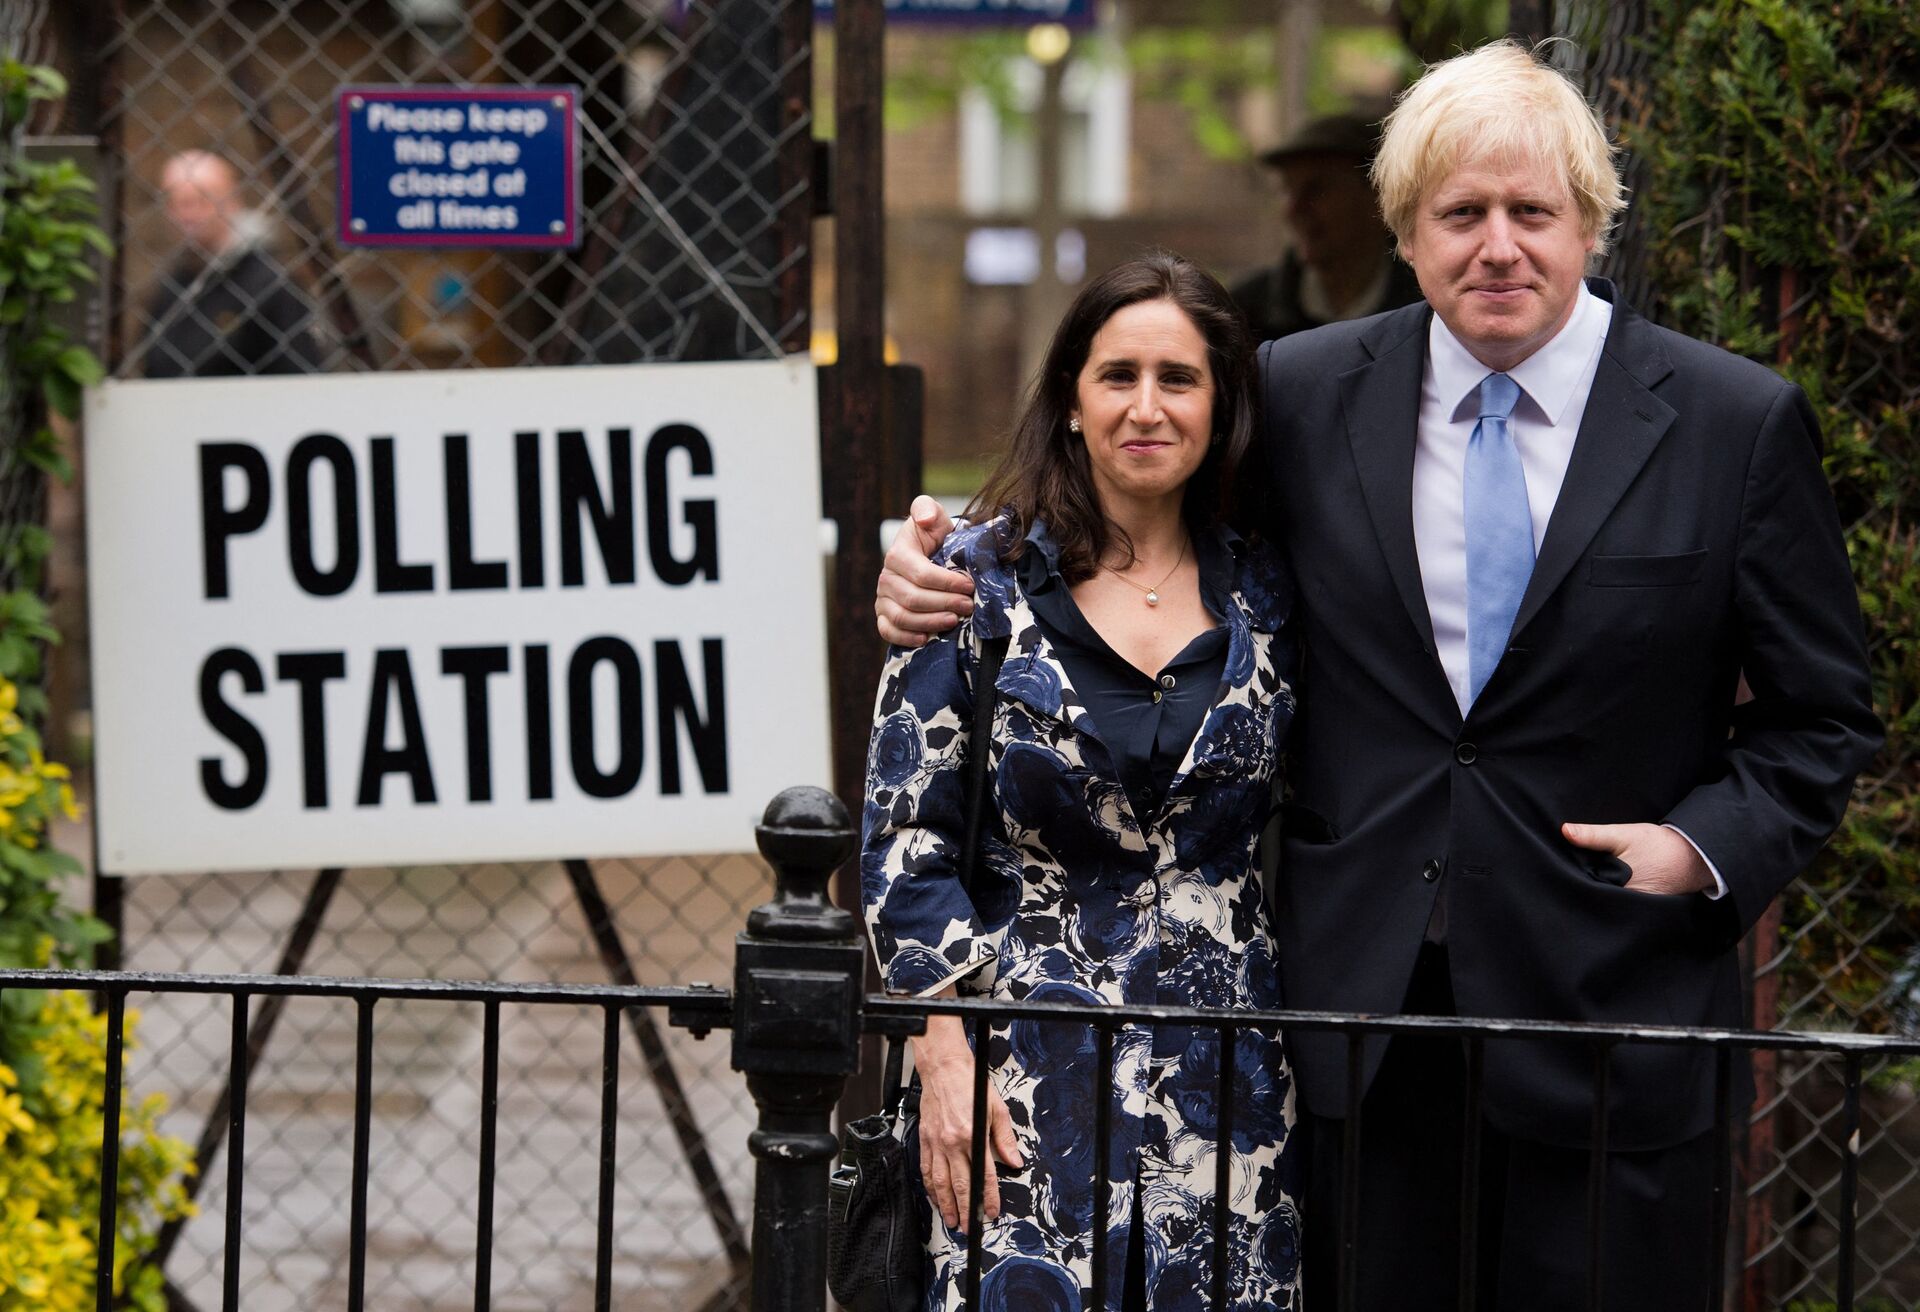 London Mayor Boris Johnson (R) stands with his wife Marina Wheeler (L) after casting his vote in the local elections - Sputnik International, 1920, 14.11.2021